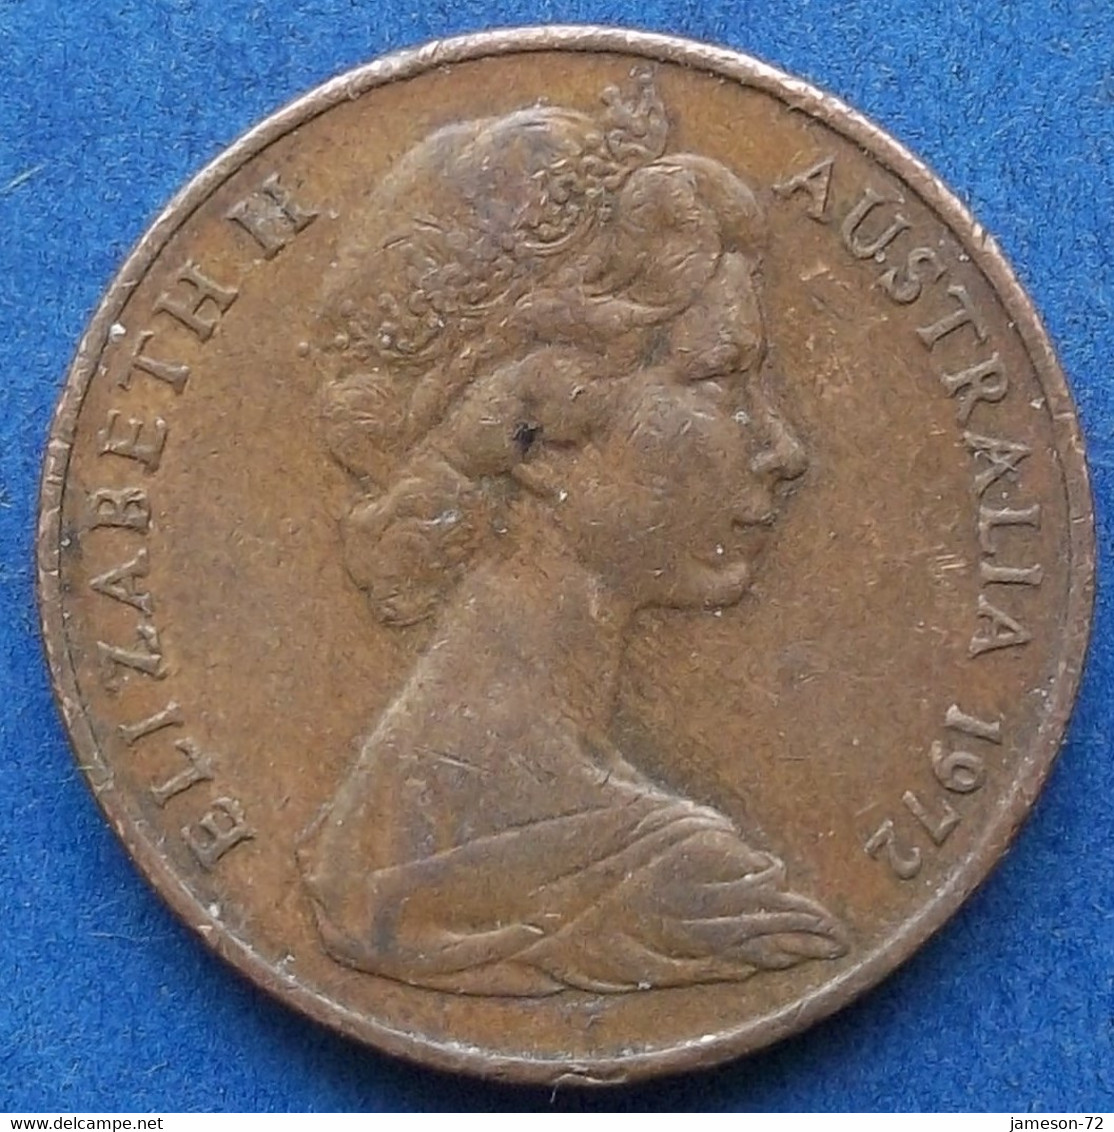 AUSTRALIA - 2 Cents 1972 "frill-necked Lizard" KM# 63 Elizabeth II Decimal Coinage (1971-2022) - Edelweiss Coins - 2 Cents